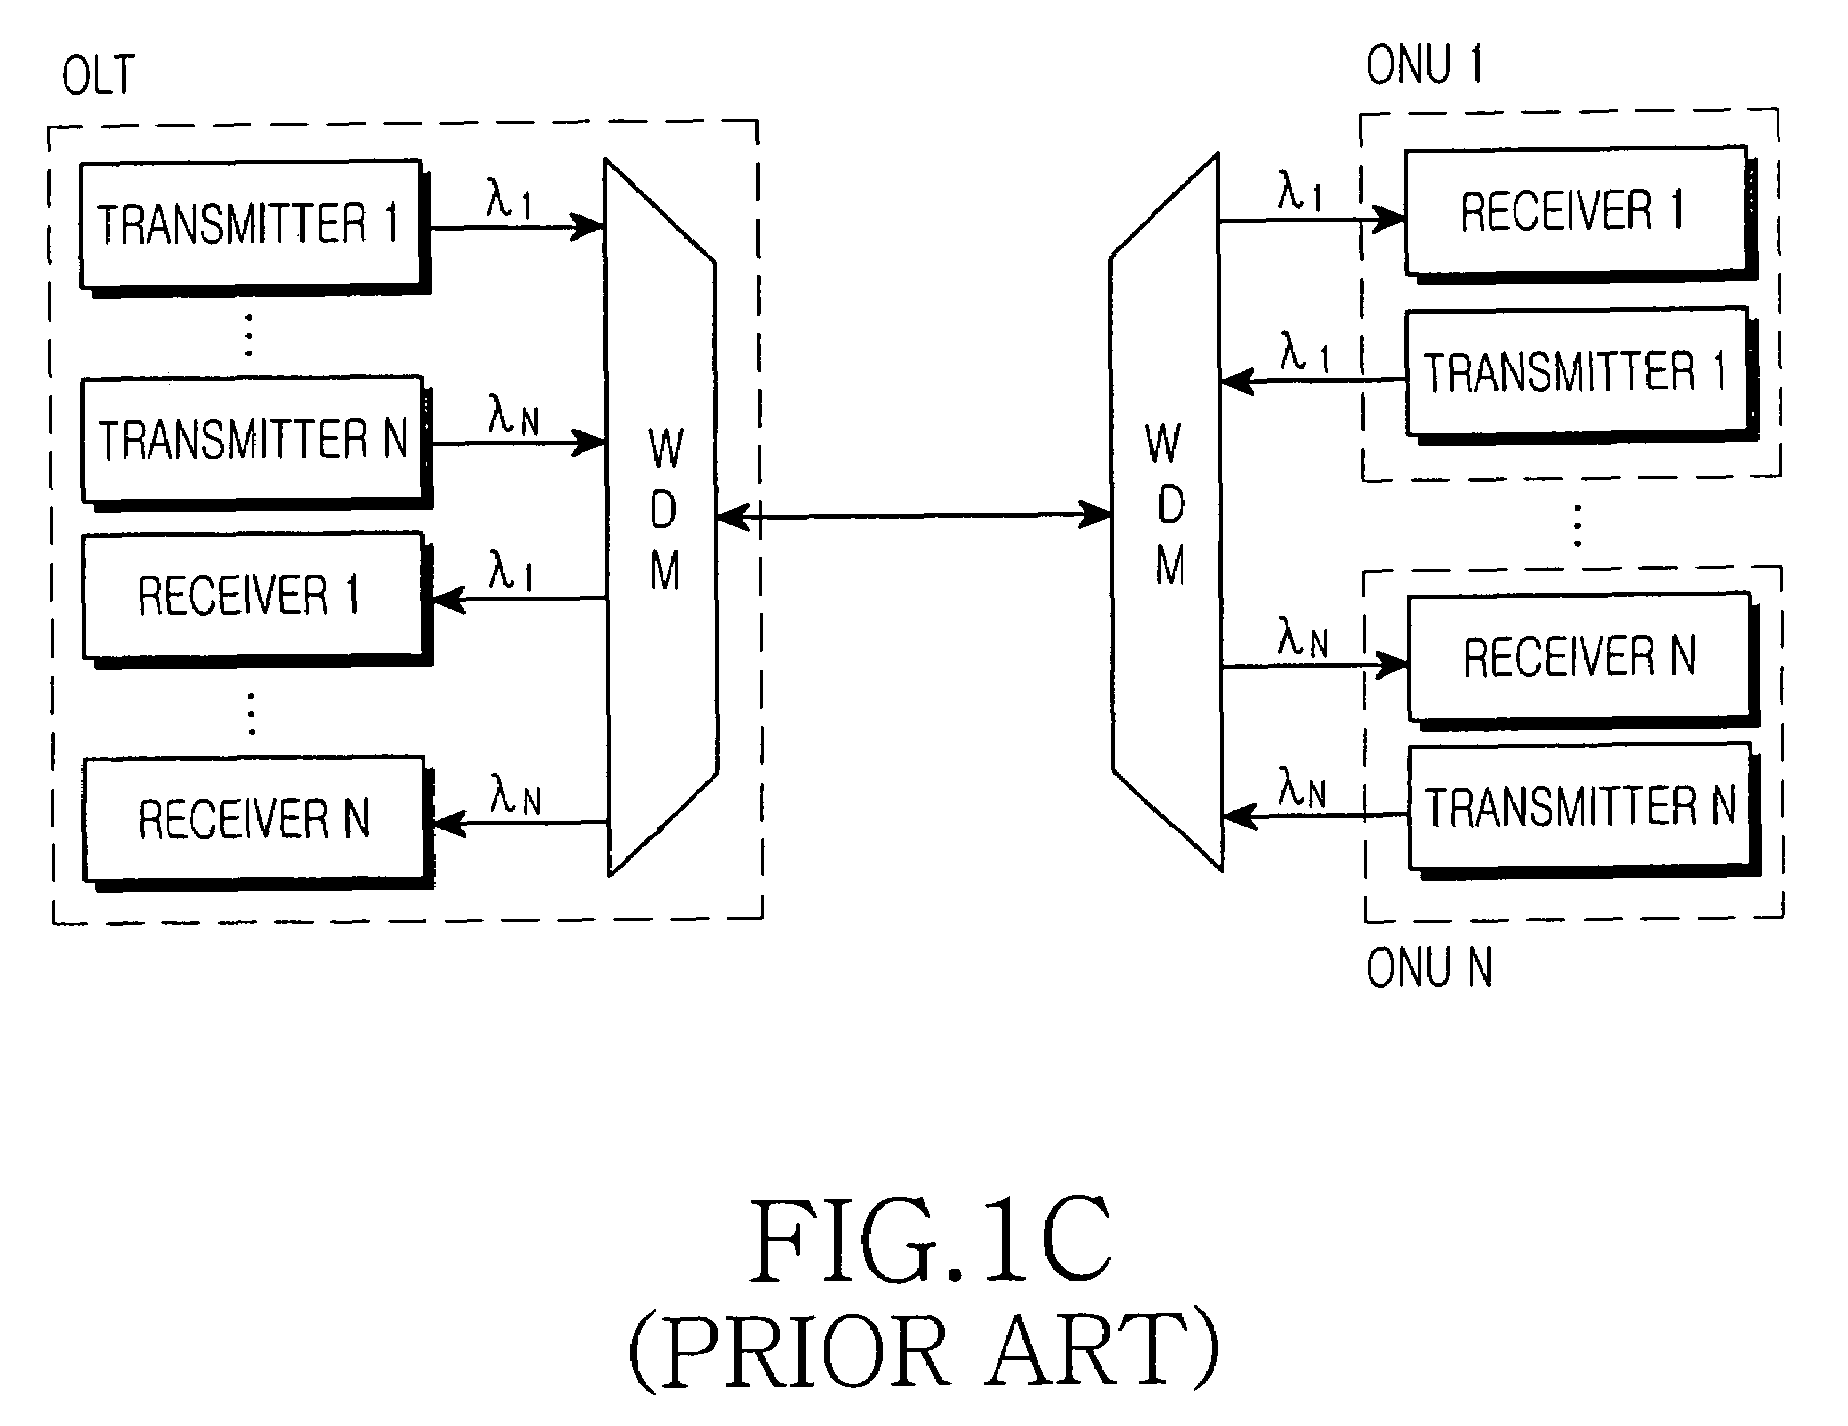 Passive optical network employing multi-carrier code division multiple access